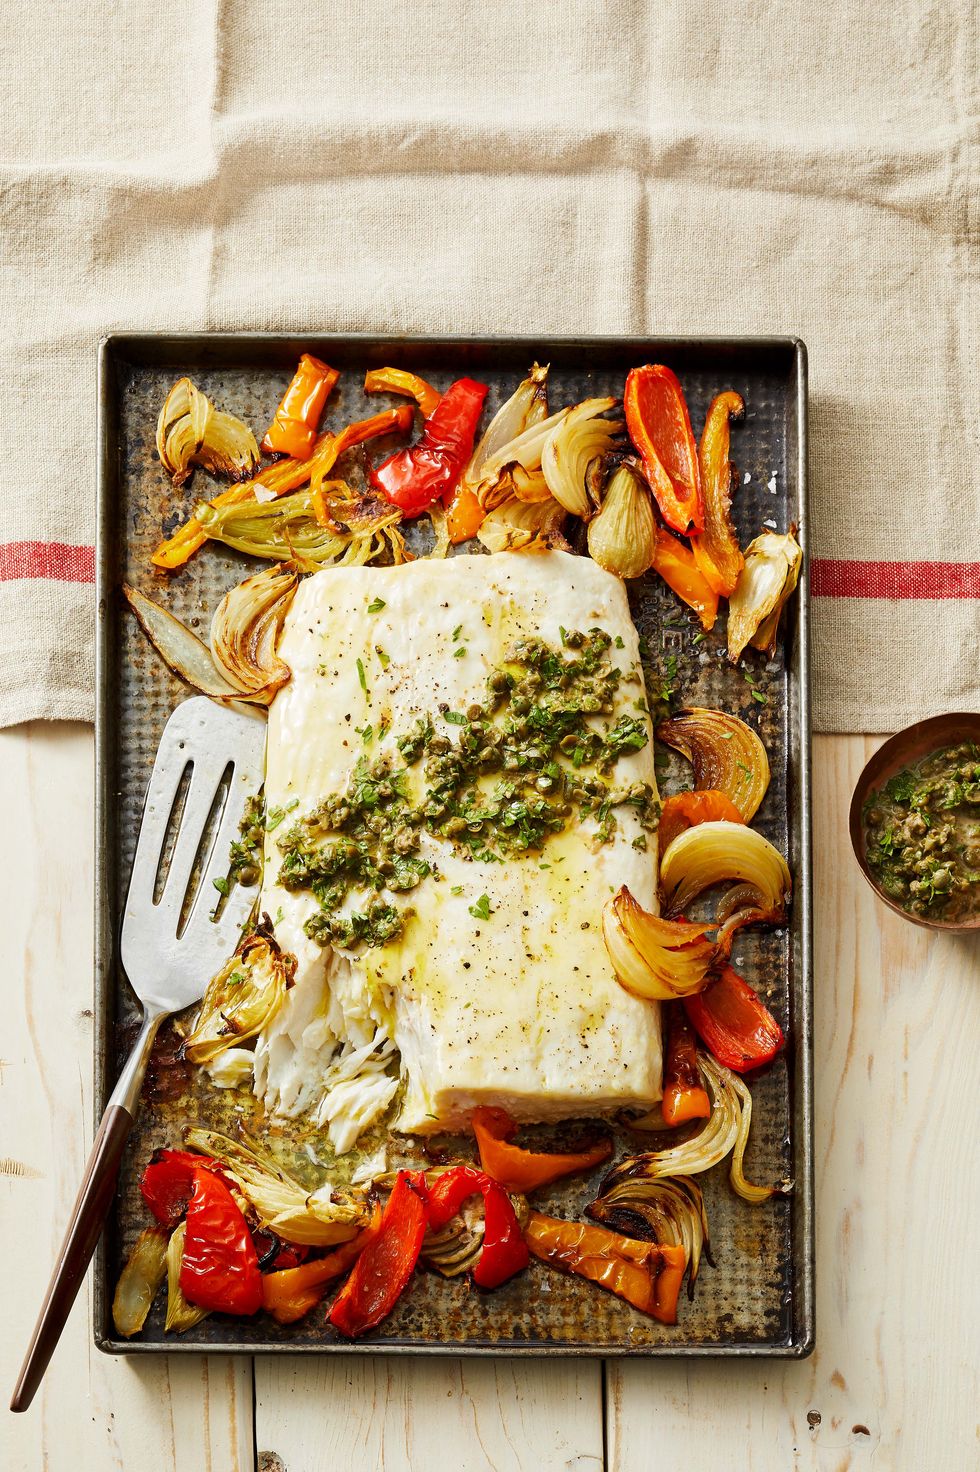 https://hips.hearstapps.com/hmg-prod/images/sheet-pan-fish-and-vegetables-654512cea0a71.jpg?crop=0.816xw:0.817xh;0.0714xw,0.0658xh&resize=980:*